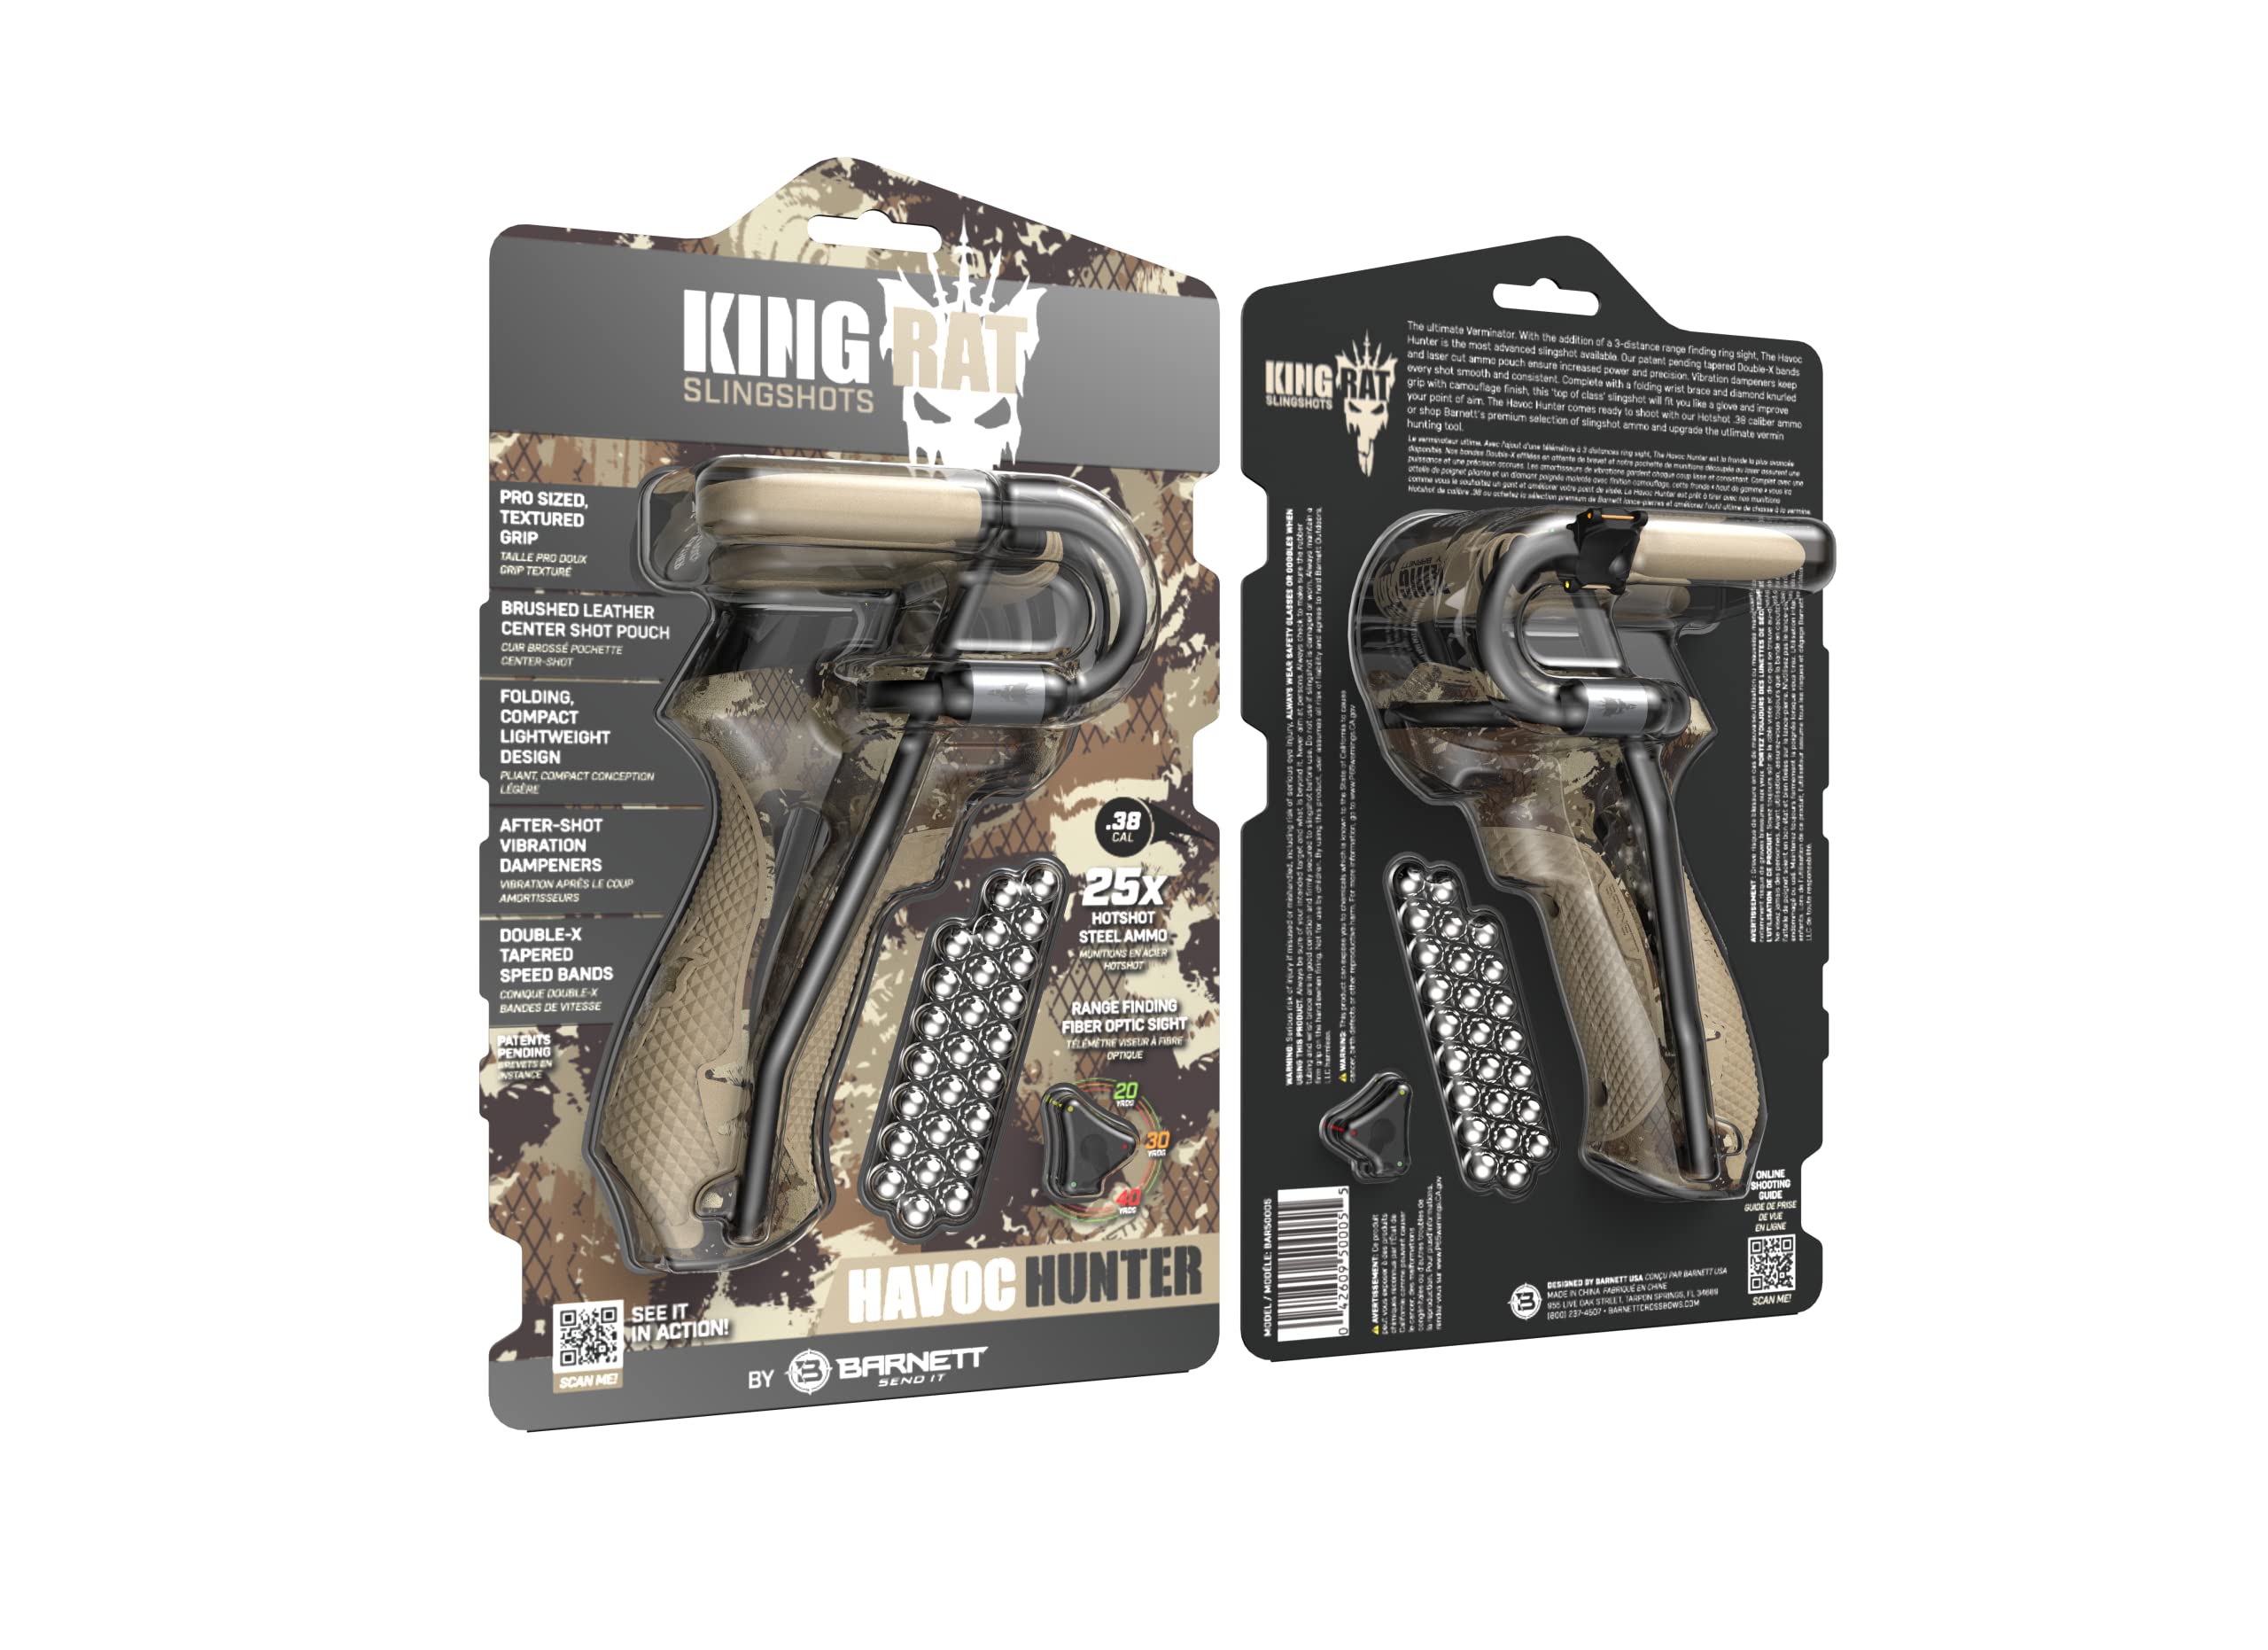 BARNETT King Rat Slingshots, Powerful Slingshot for Adults and Kids Alike, Includes Power Band, Brushed Leather Pouch, & Slingshot Ammo